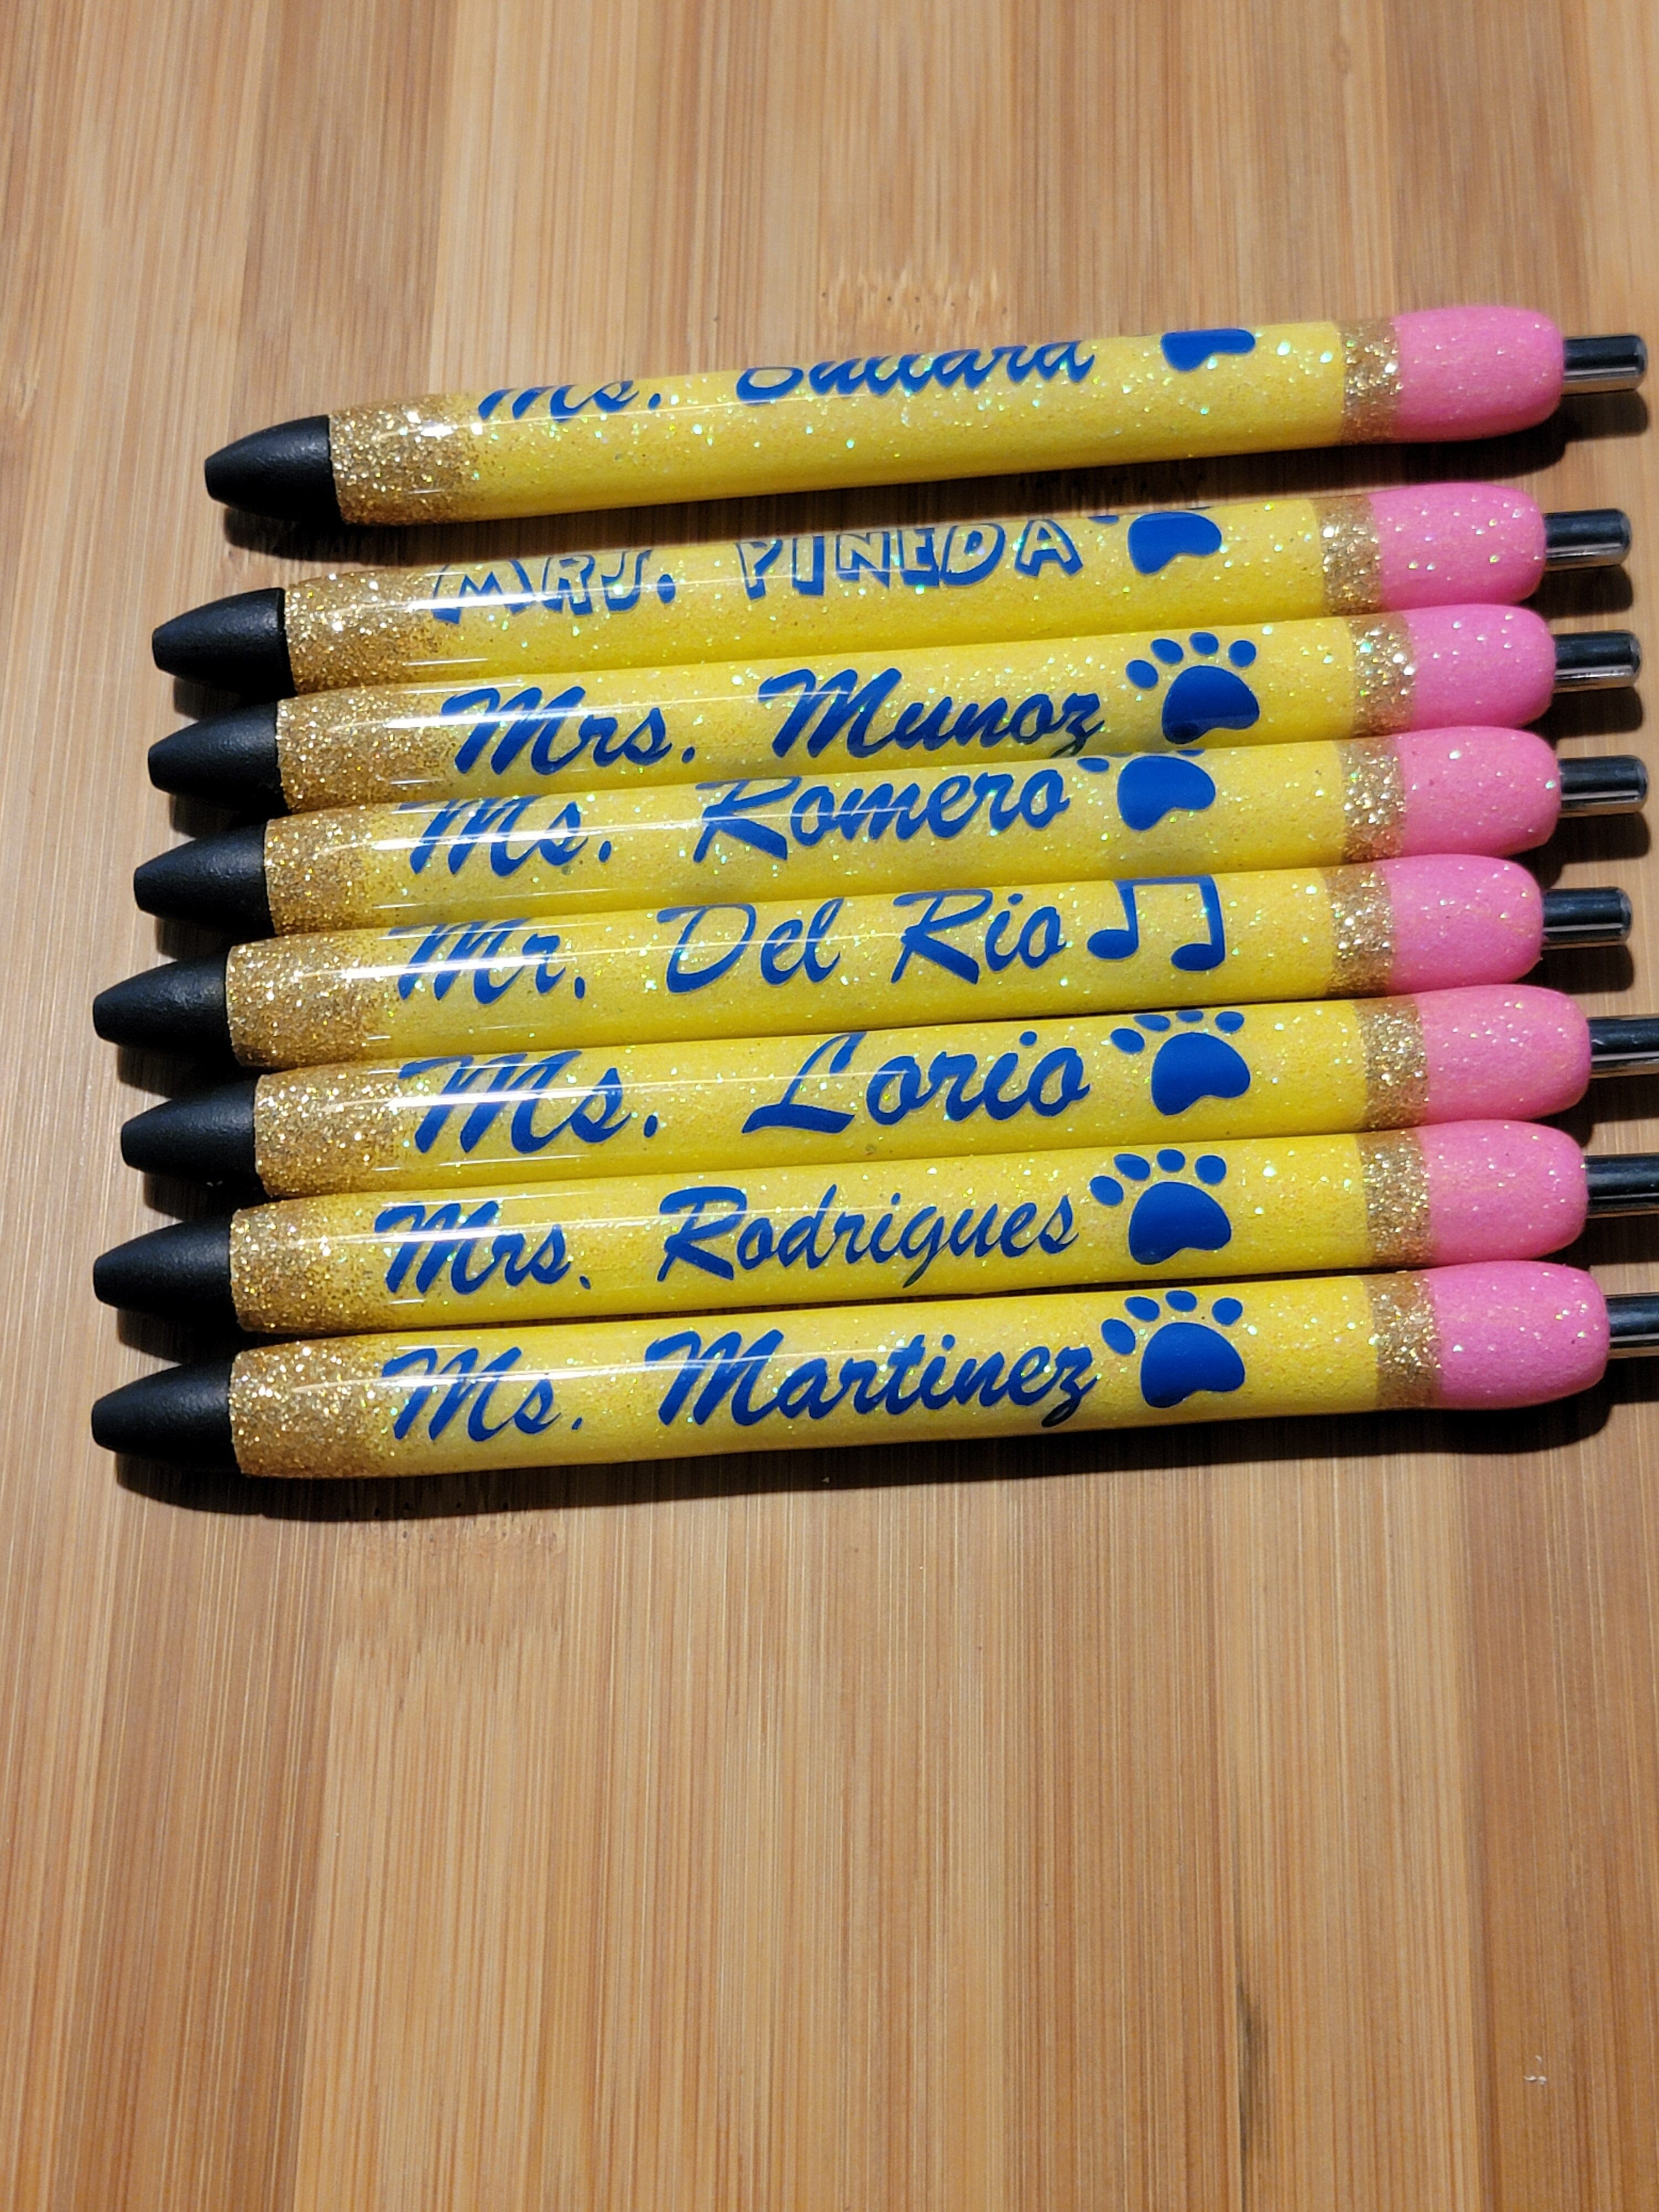 https://cdn.shopify.com/s/files/1/0659/8390/6035/products/pencil-pens-personalized-for-teacher-gifts-gravesfamilycreations-694992.jpg?v=1689509443